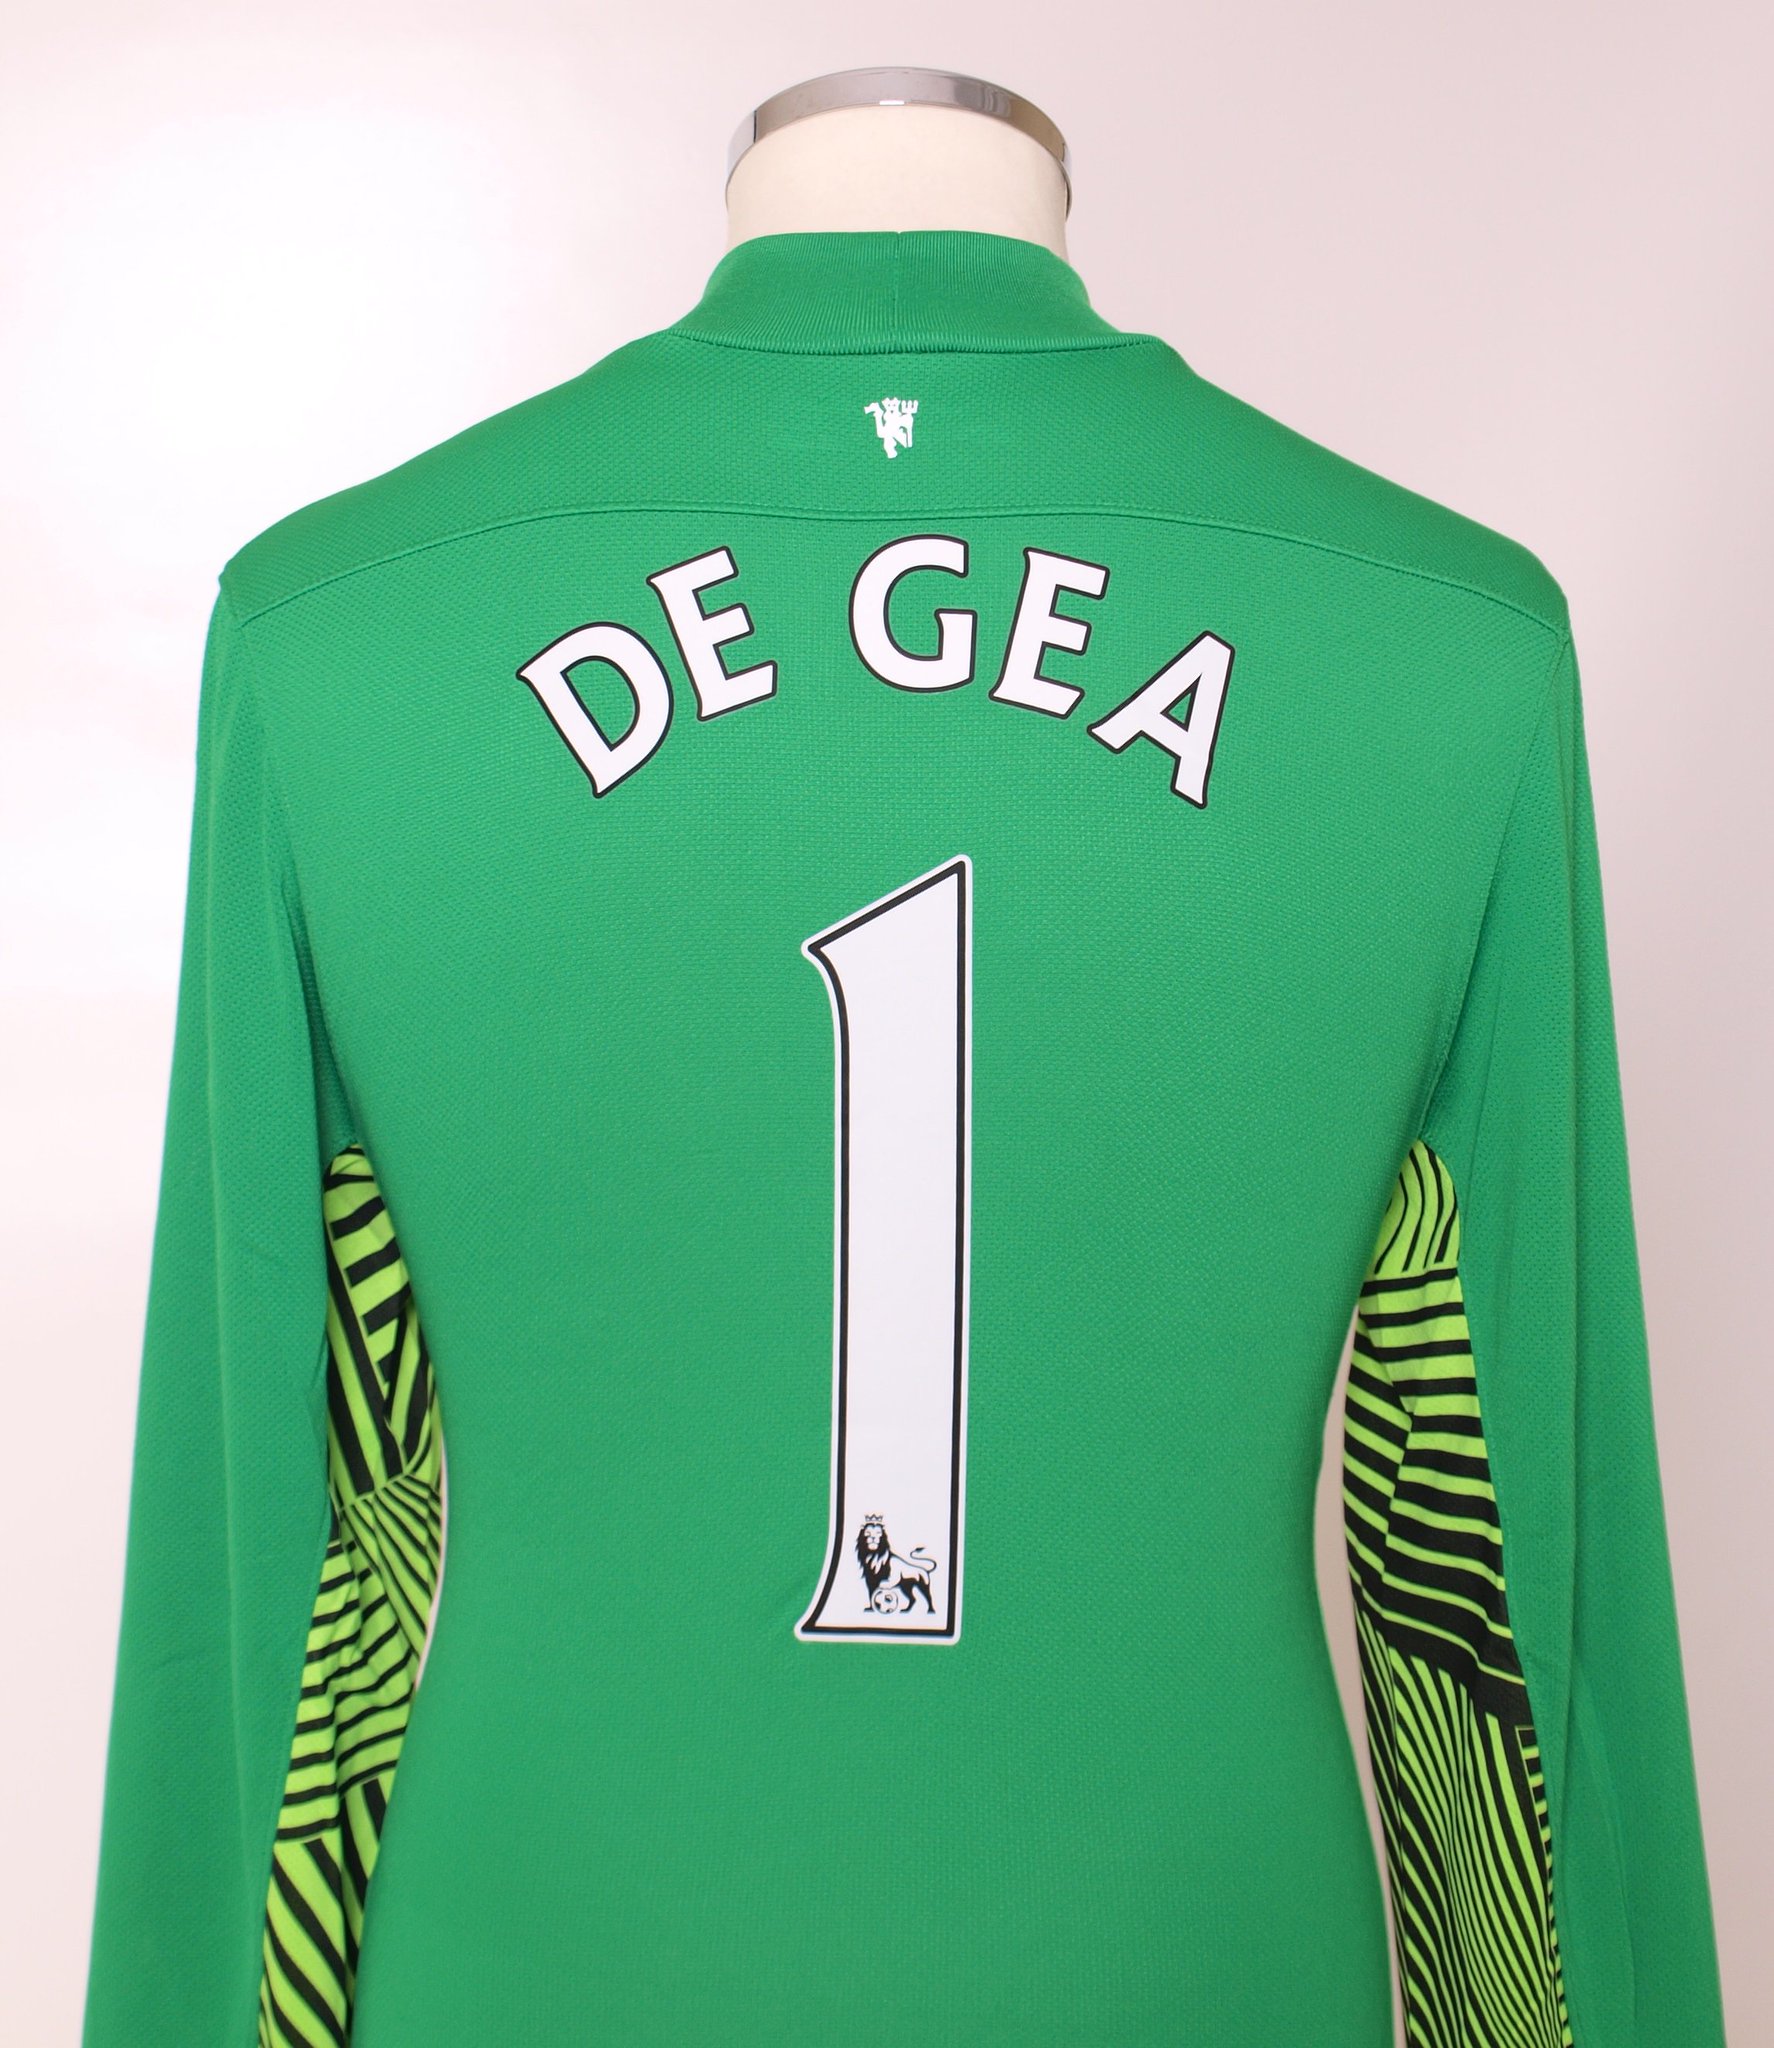 Happy Birthday to one of the best goalkeepers in the world... David De Gea! 